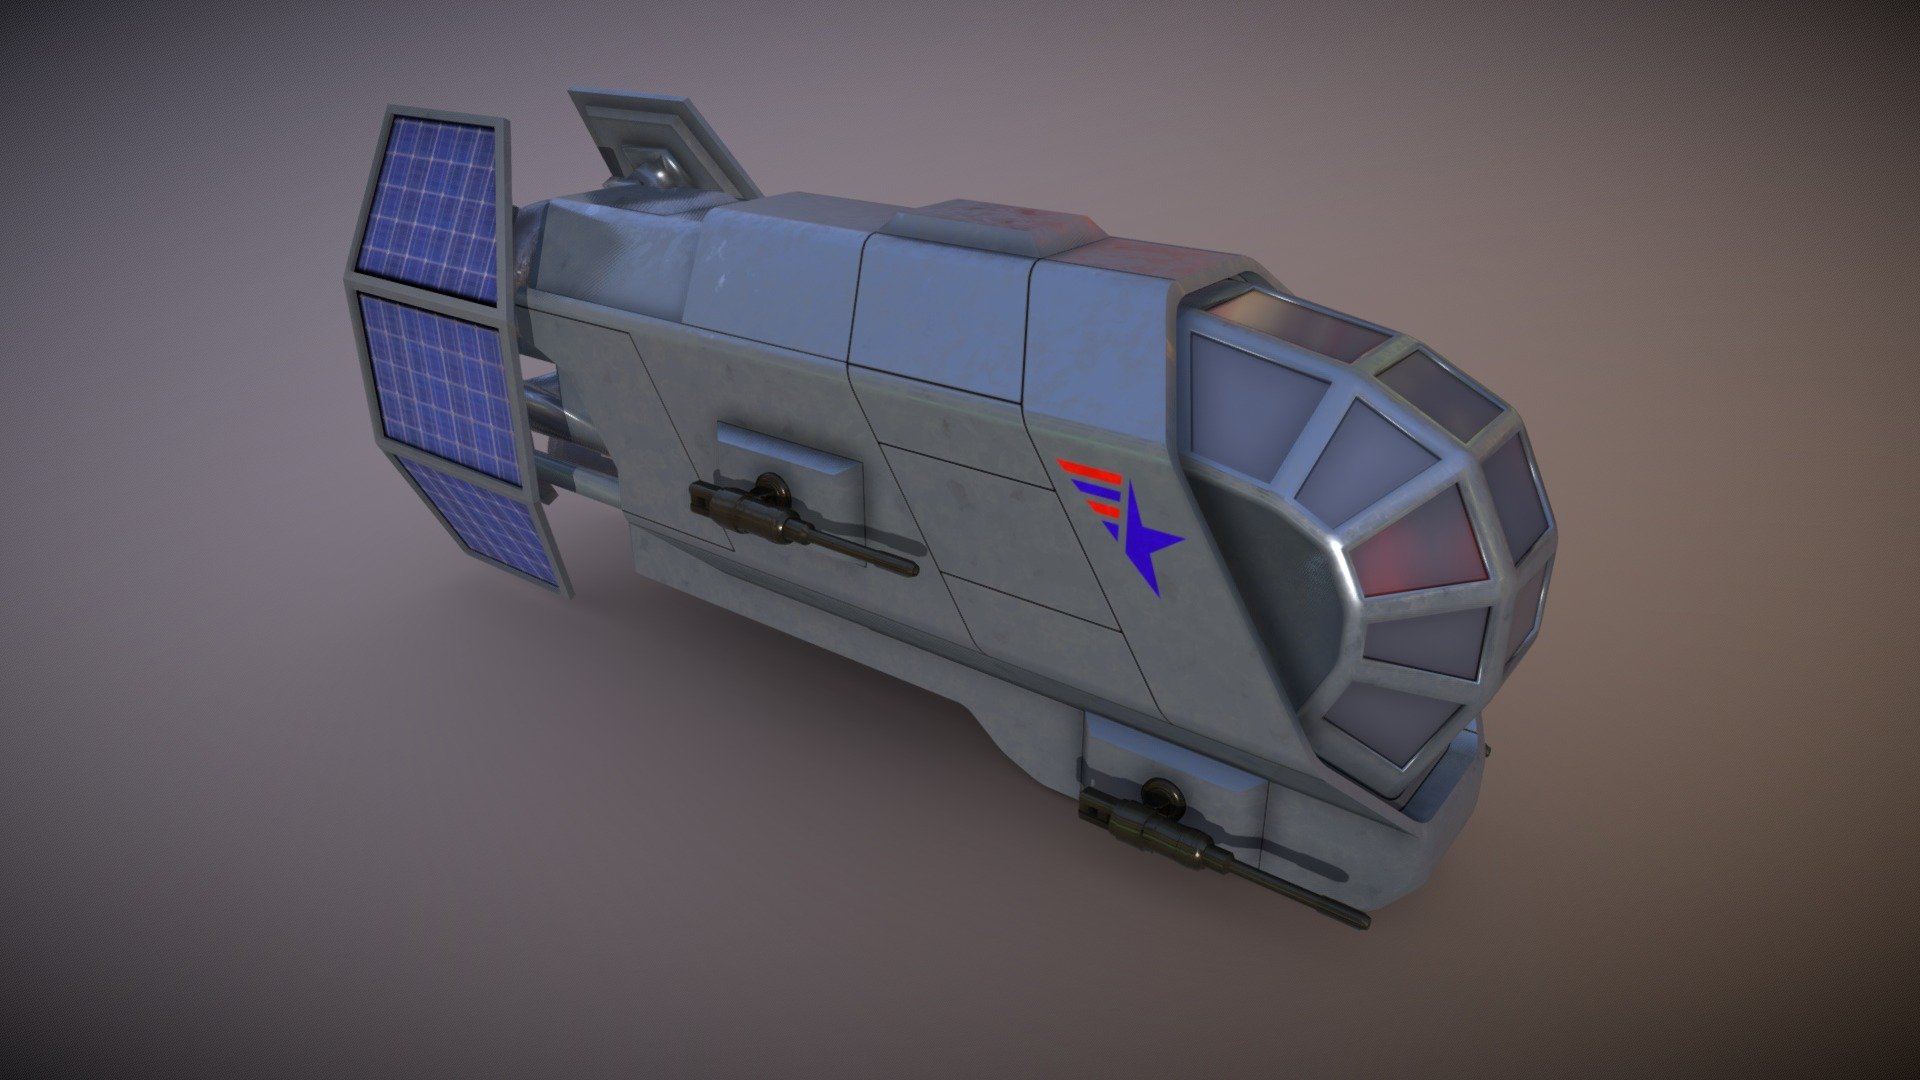 Spaceship Patriot Type 1

Polygons: 7657 or 3081 without weapons;
Vertices: 9329 or 3913 without weapons;
Objects: 17 or 5 without weapons.

Textures:
- Diffuse map (Albedo) - DIFF;
- Normal map - NORM;
- Roughness map - ROUG;
- Metallic map - METAL;
- Specular map - SPEC.

All textures are square 3d model